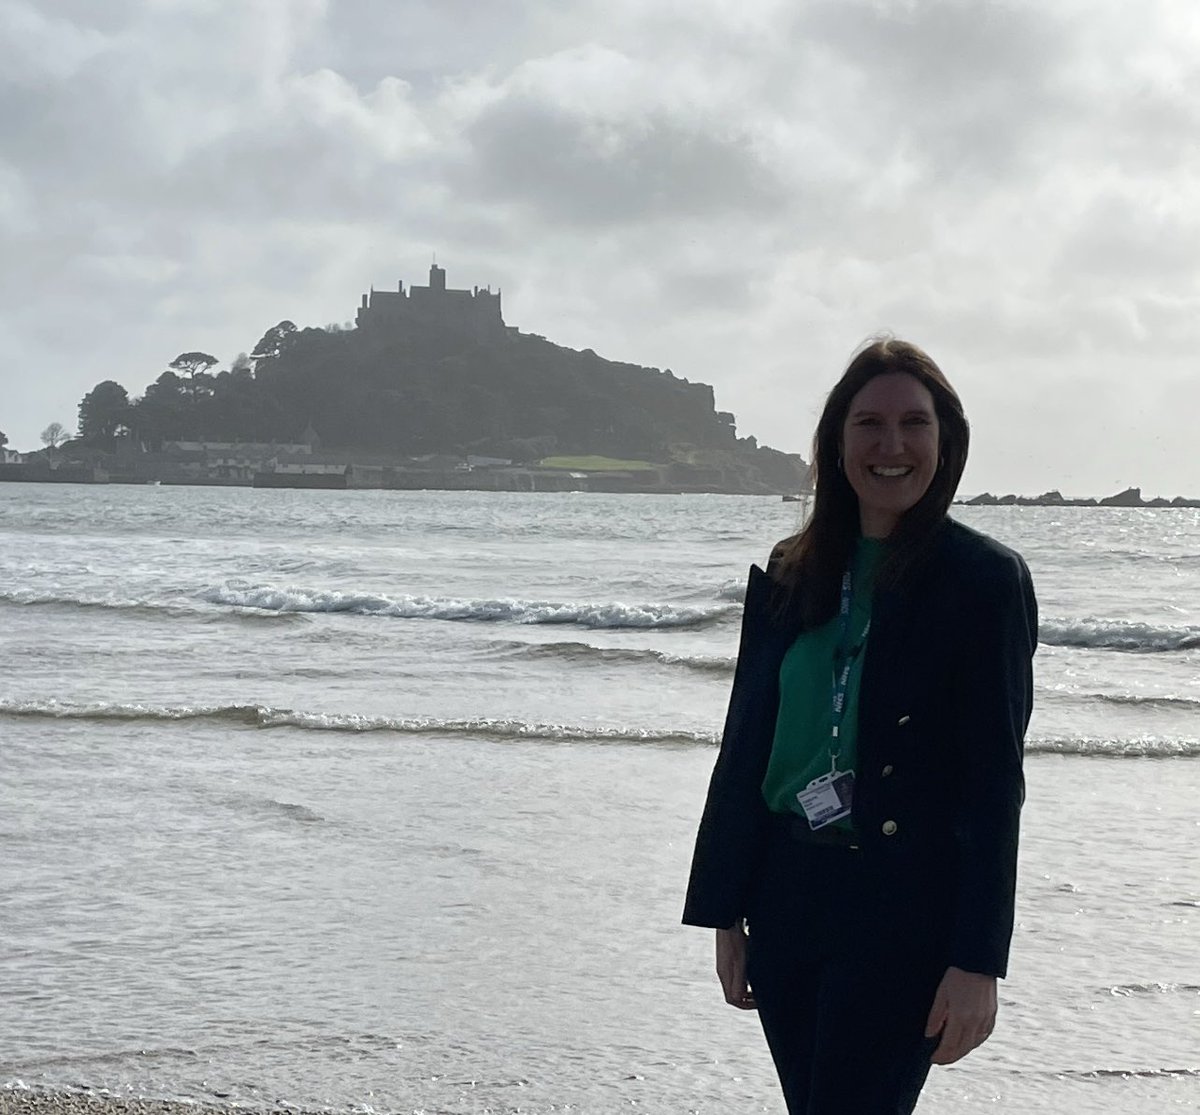 Today we hosted our Supporting Ahead Programme (SAP) at Marazion. What a fantastic view of St. Michael’s Mount- #Admiralnursing #supportingfamilies @ANS_Cornwall